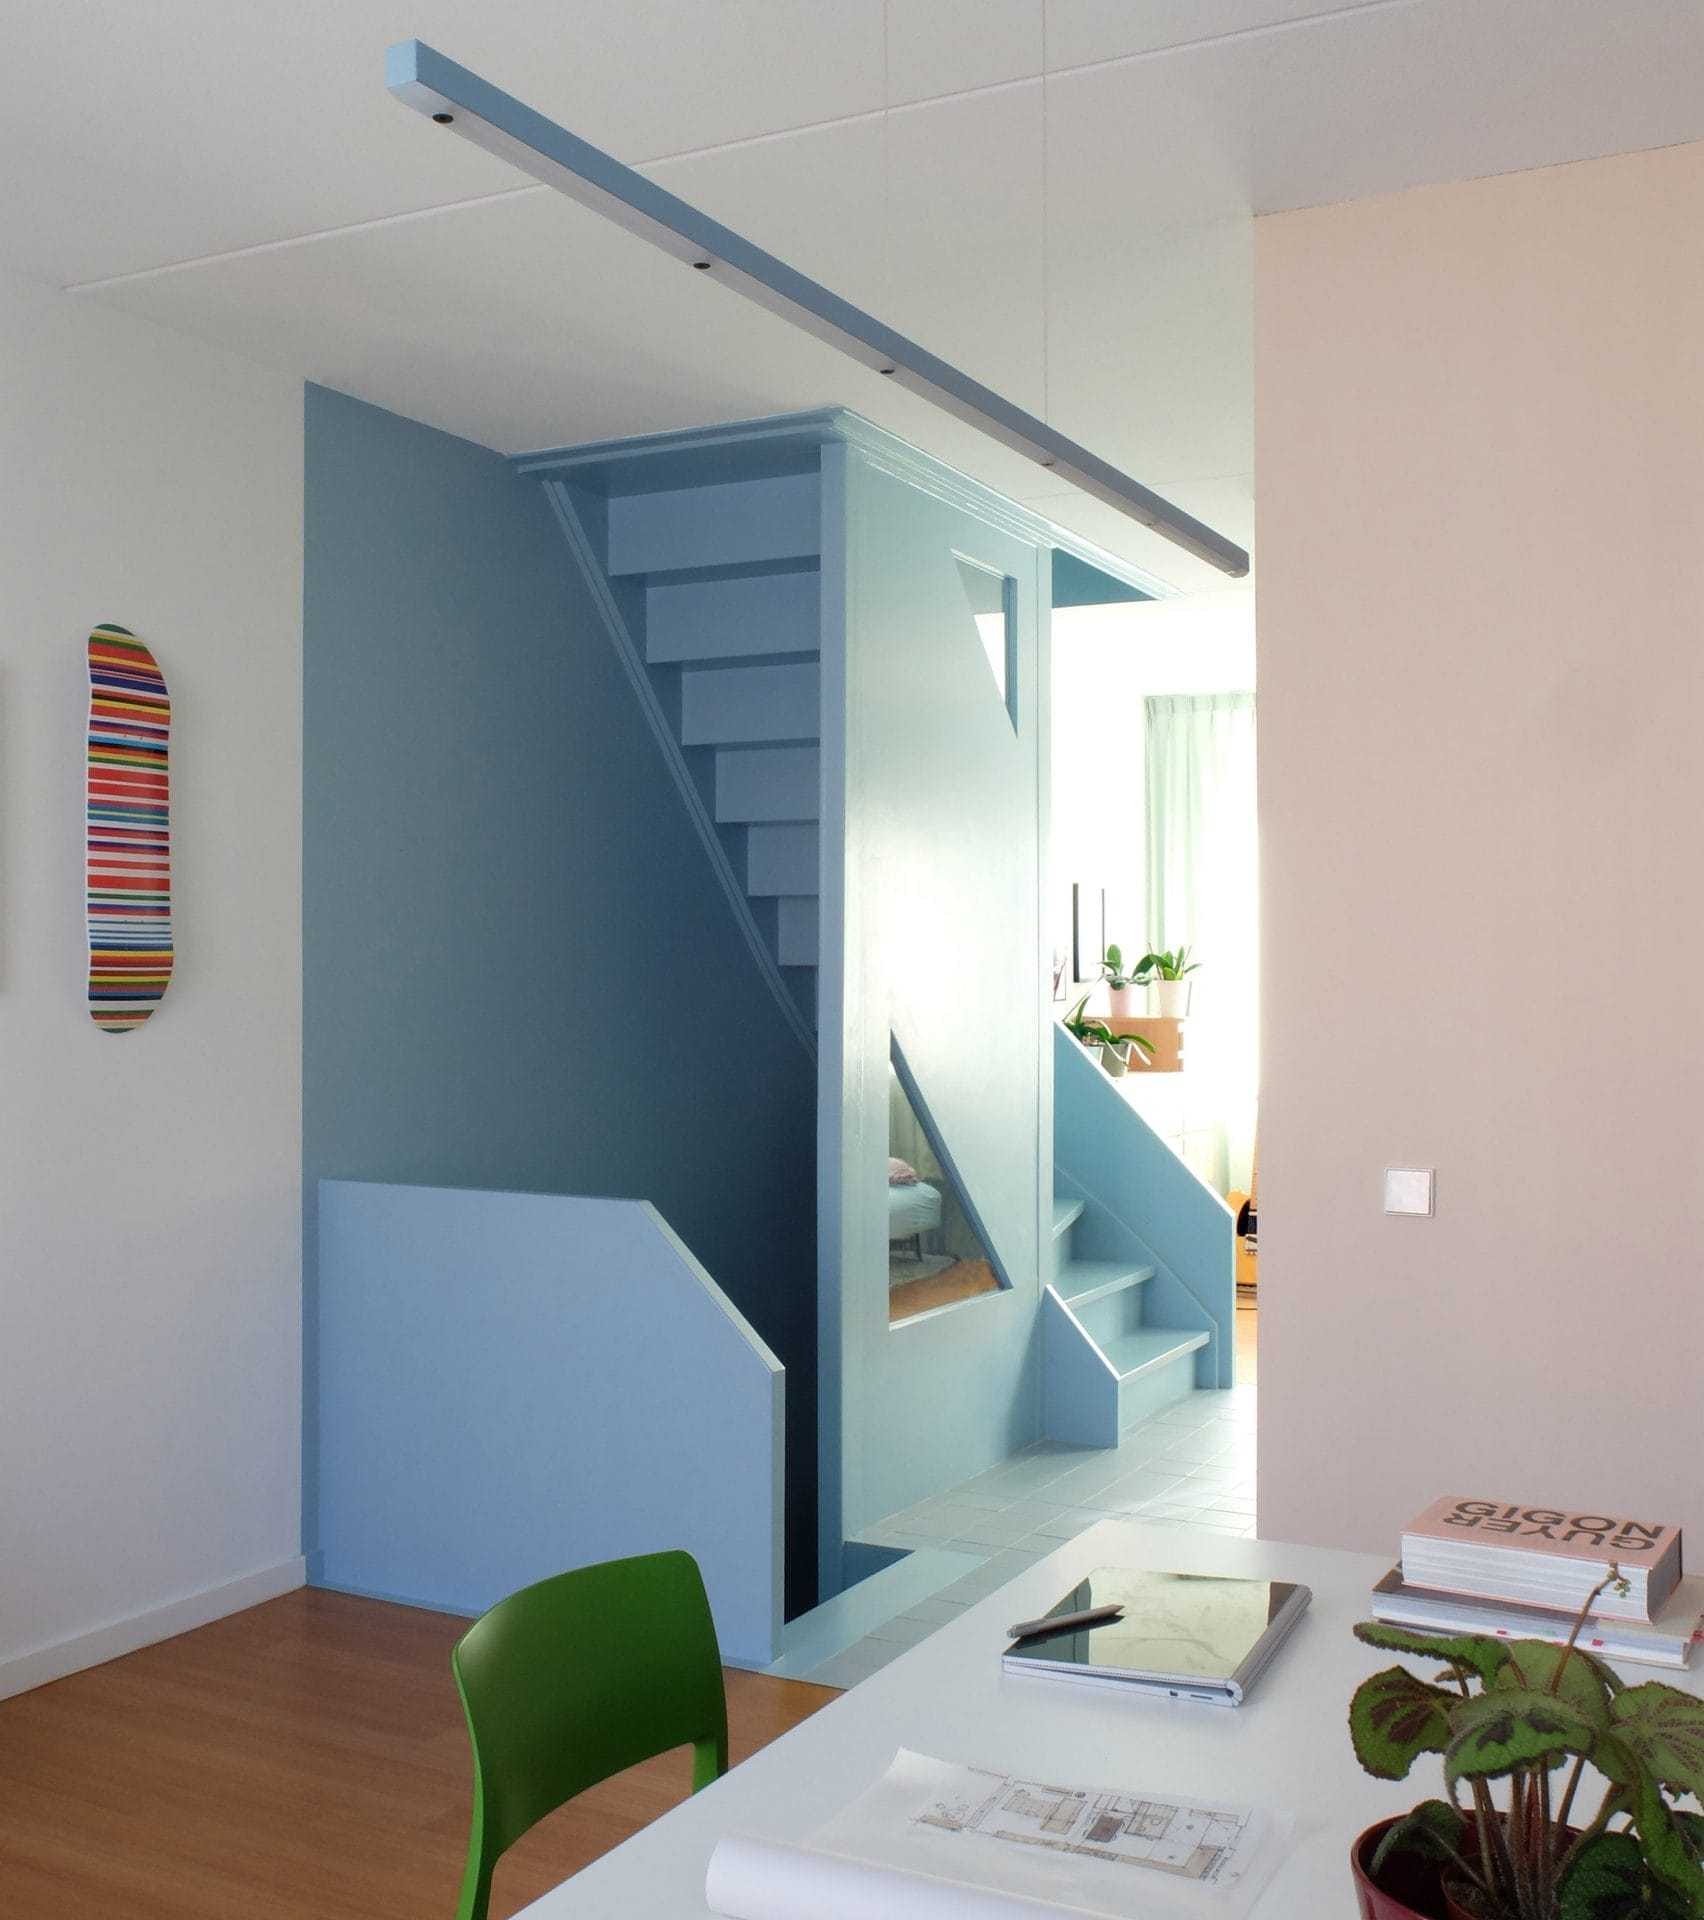 workhome-playhome-house_designalive-14